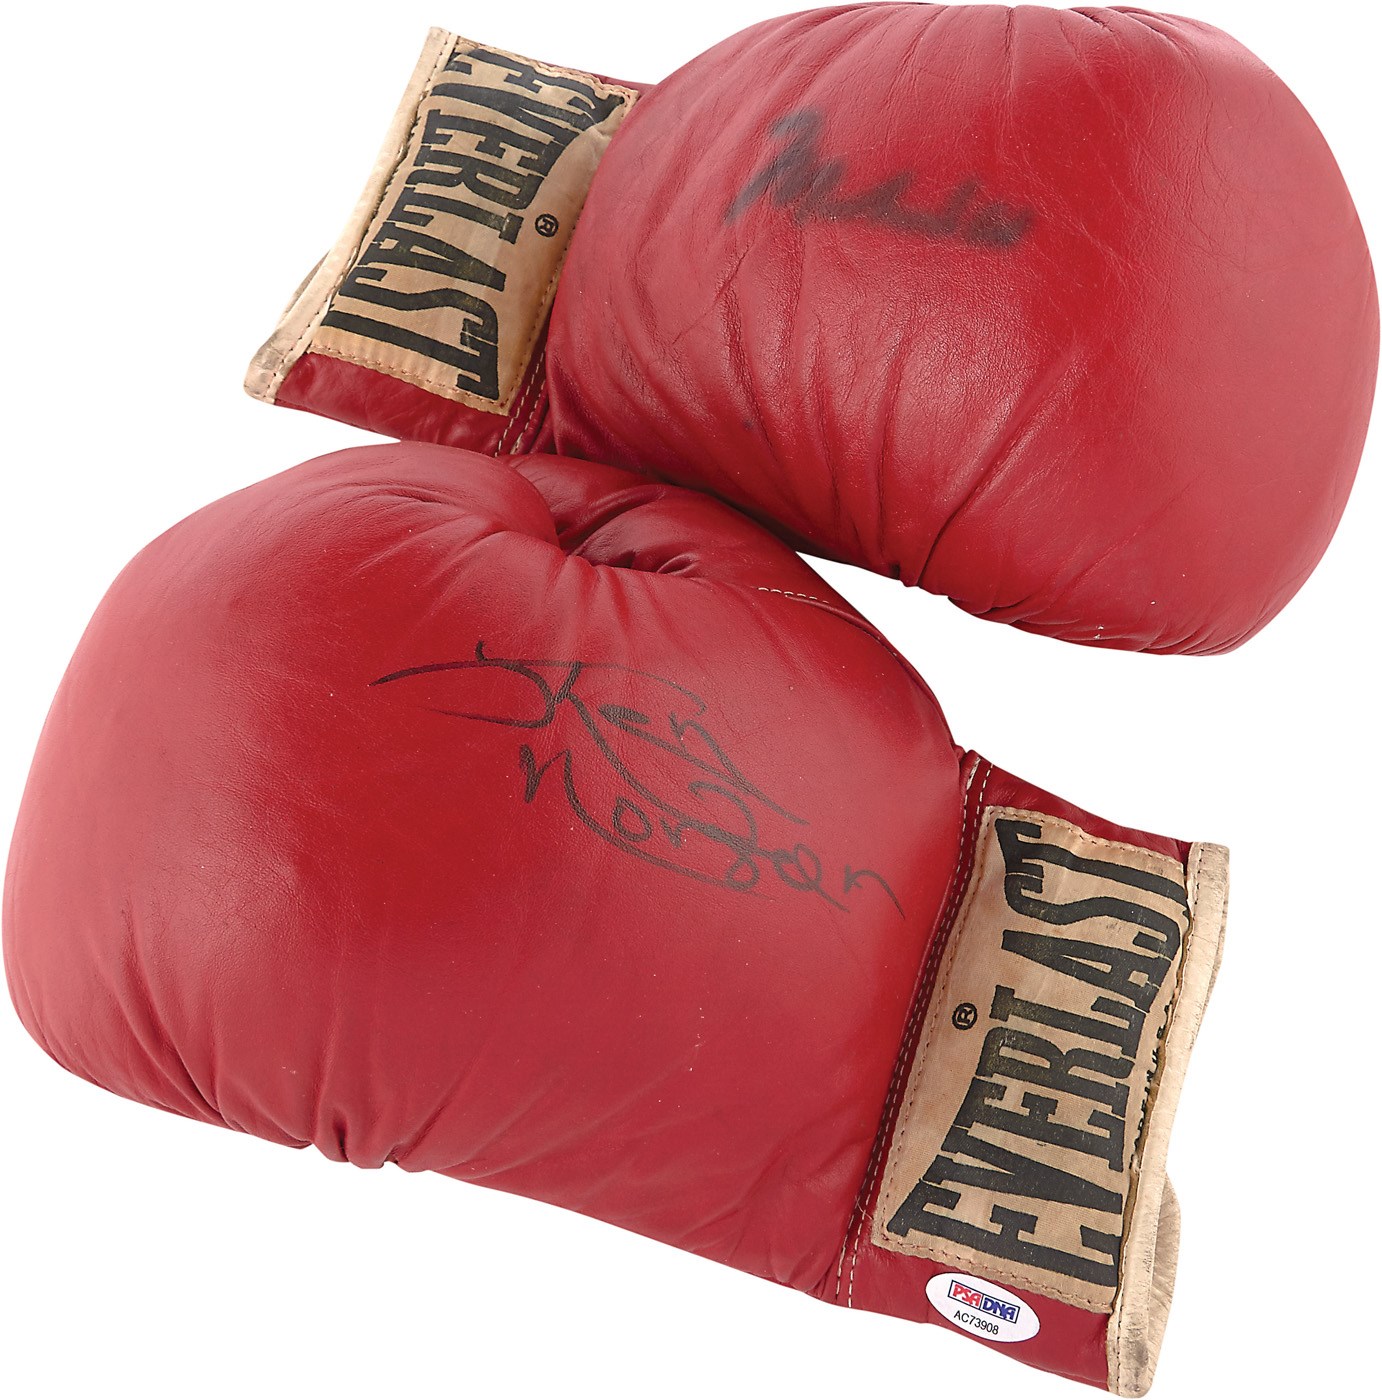 - Ken Norton 1976 Fight Worn Gloves from Norton vs. Ali III at Yankee Stadium - Signed by Norton & Ali (Photo-Matched)